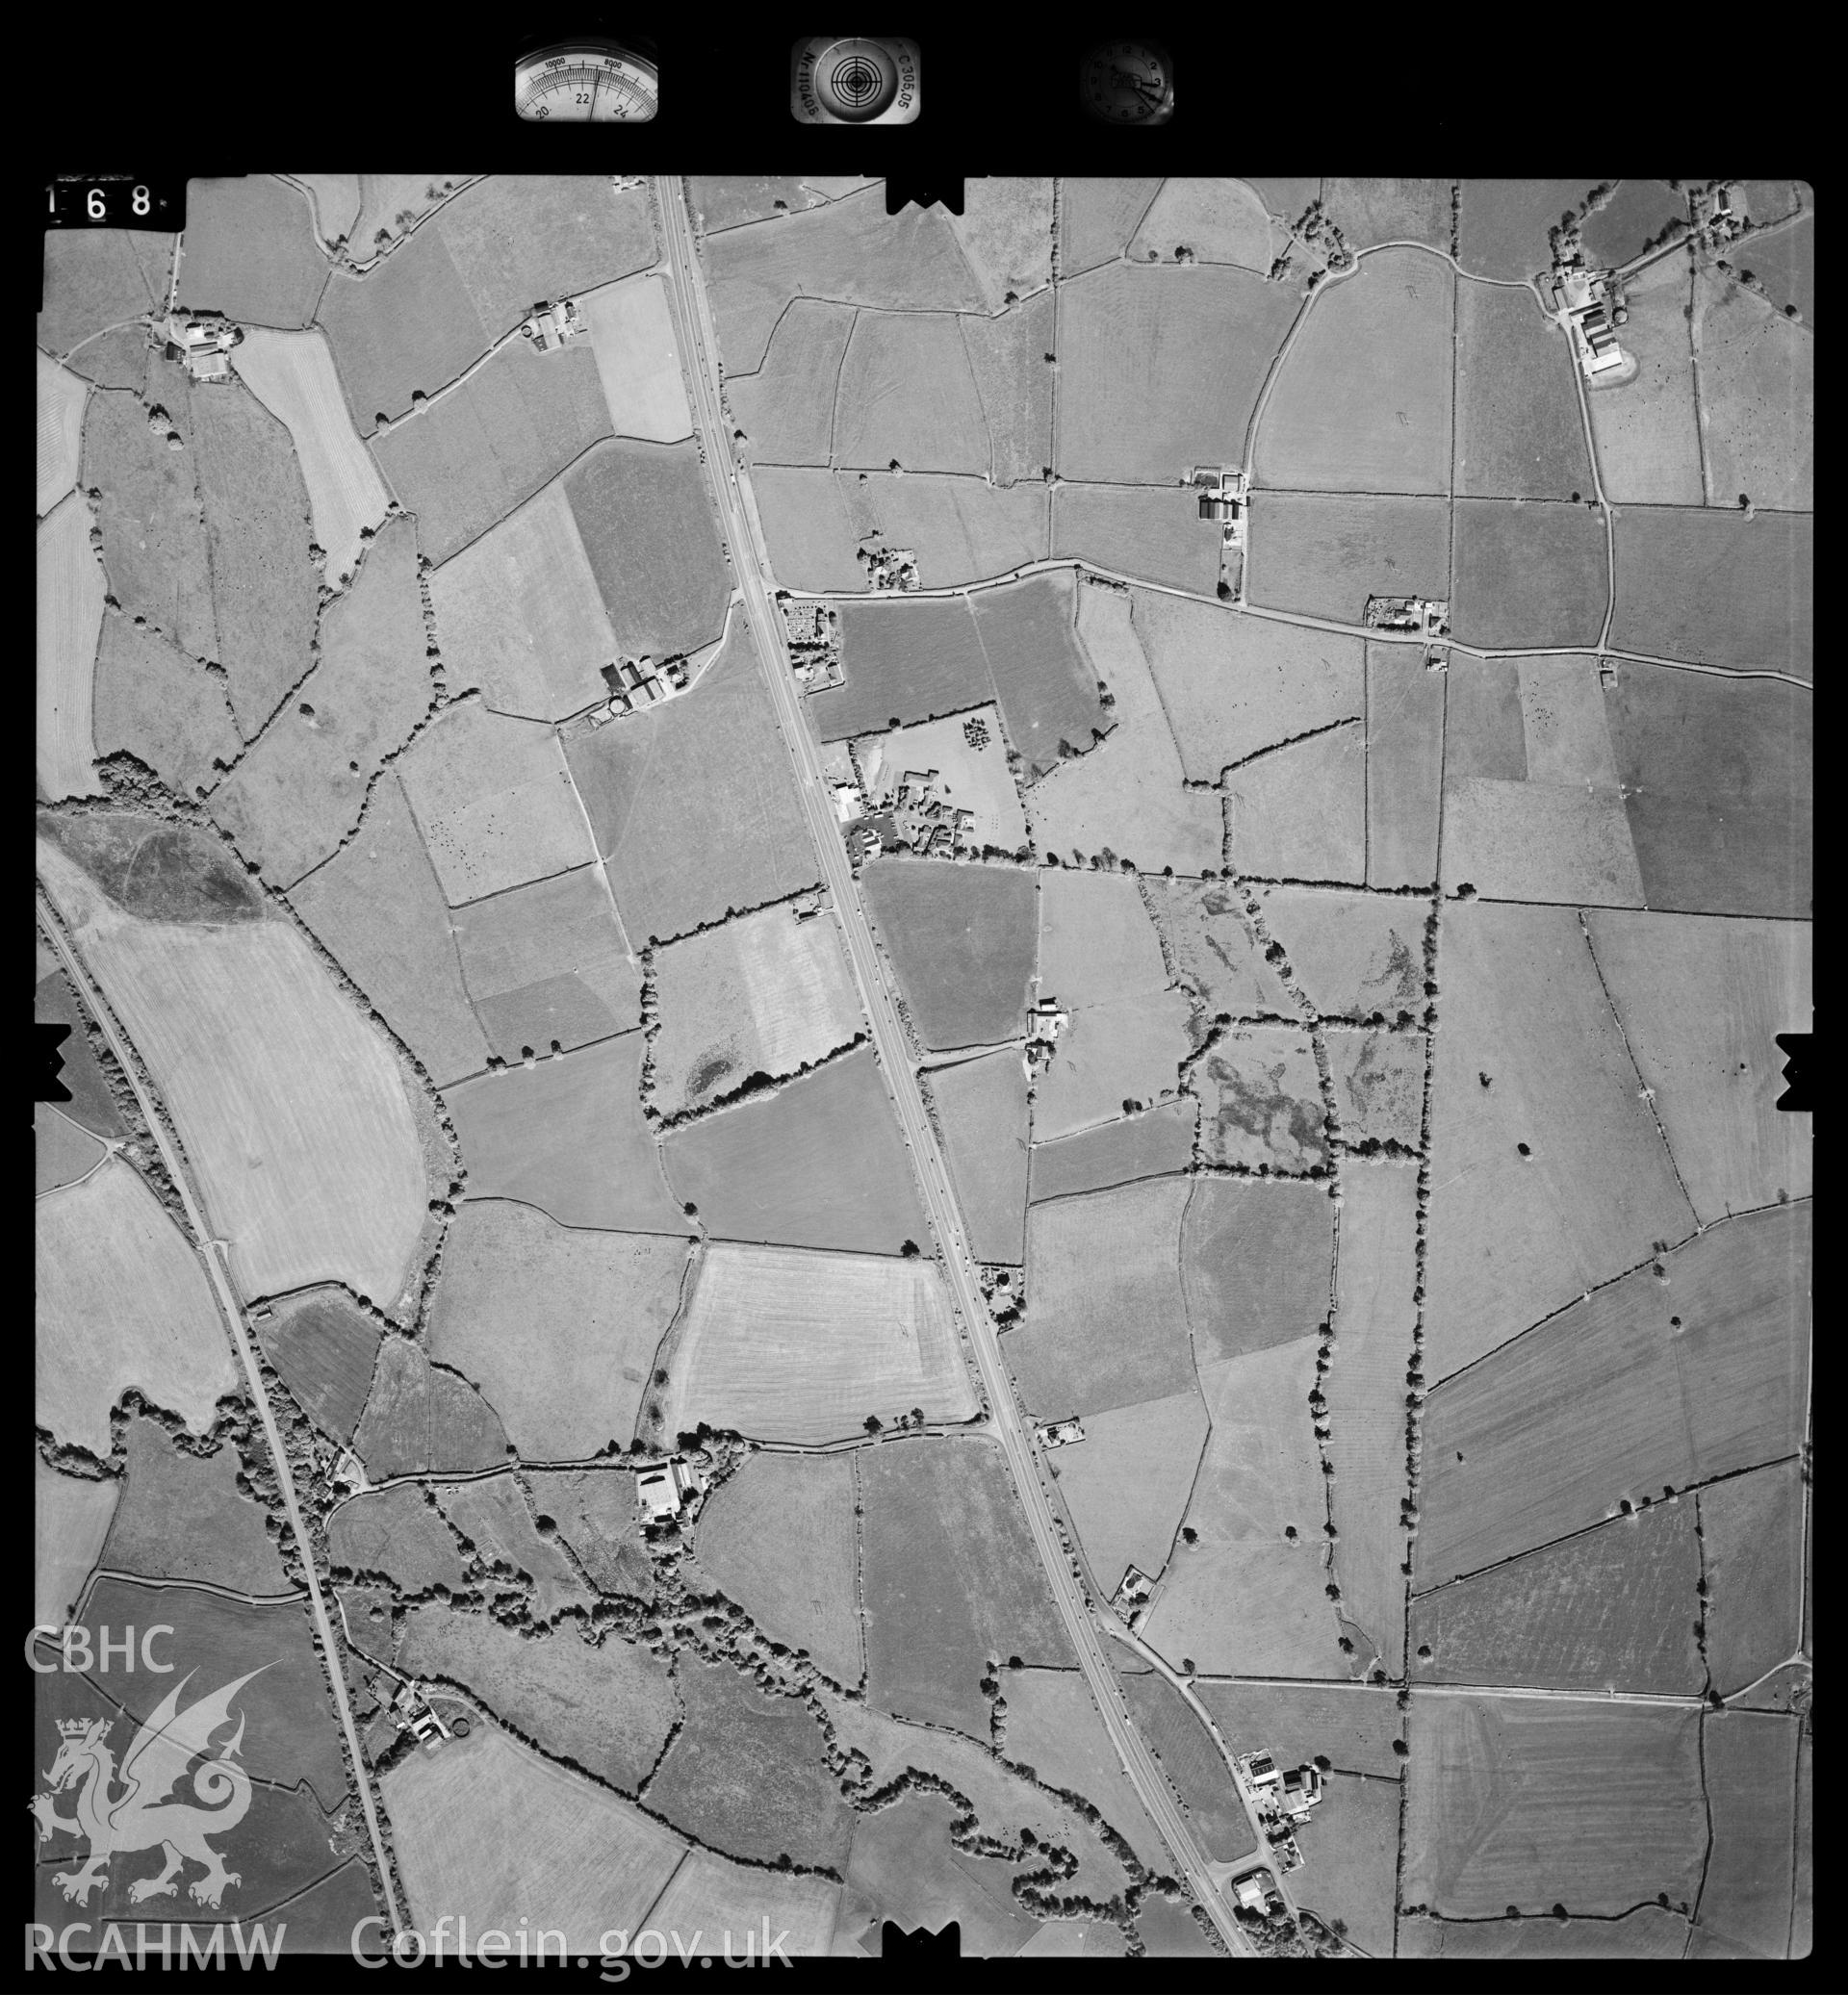 Digitized copy of an aerial photograph showing the area around St Clear's Wood, Carmarthenshire, taken by Ordnance Survey, 1997.